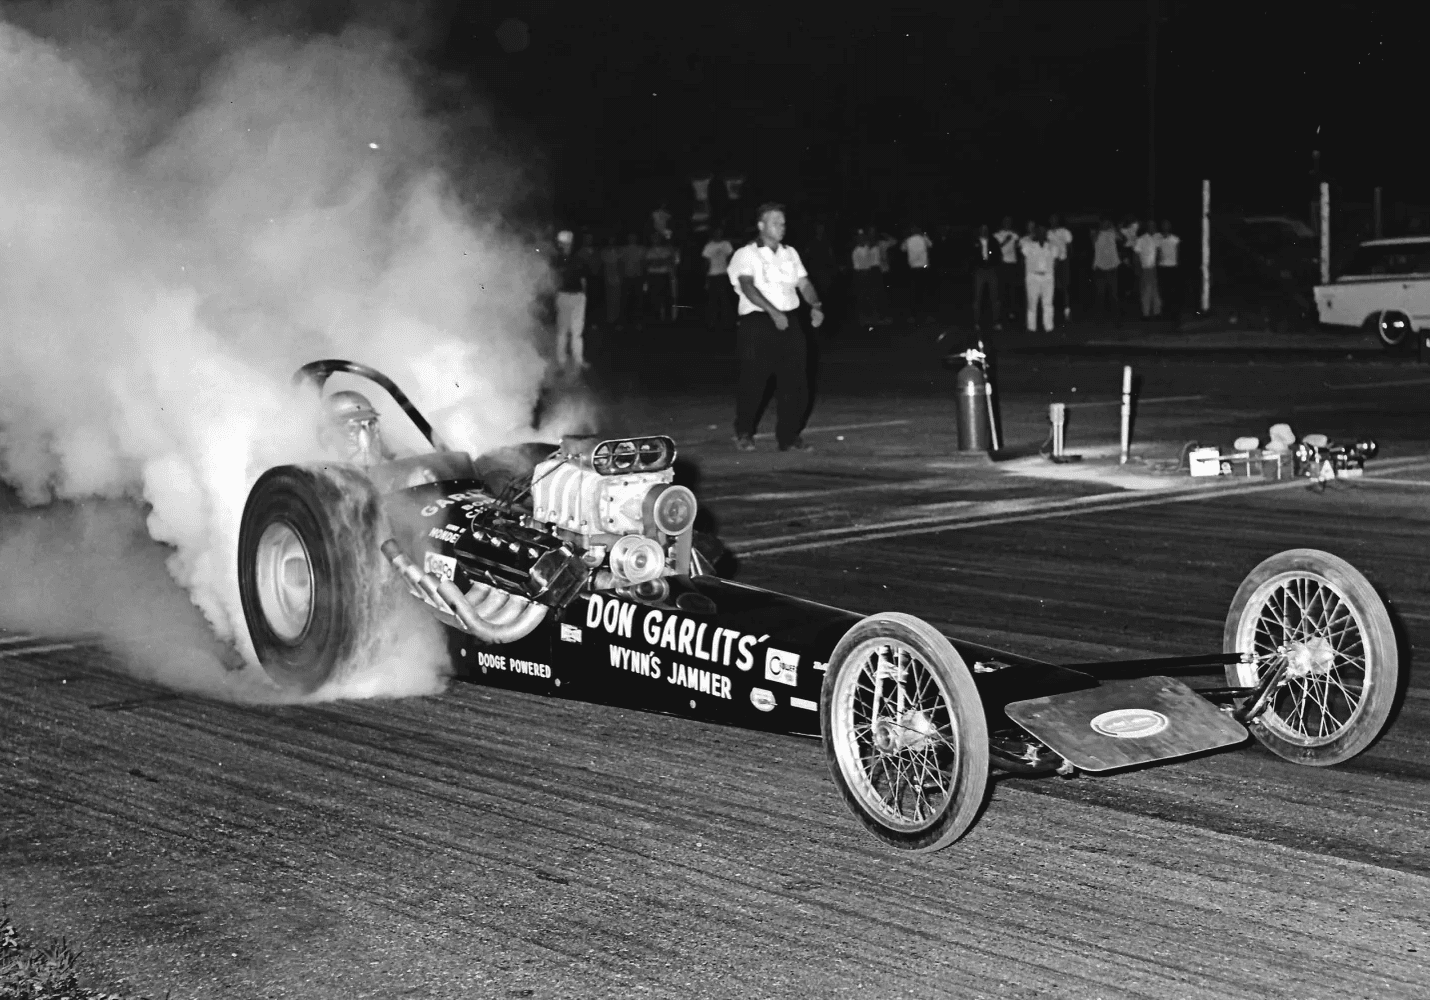 A black and white photo of a drag car with smoke billowing out of it during an intense drag racing event.